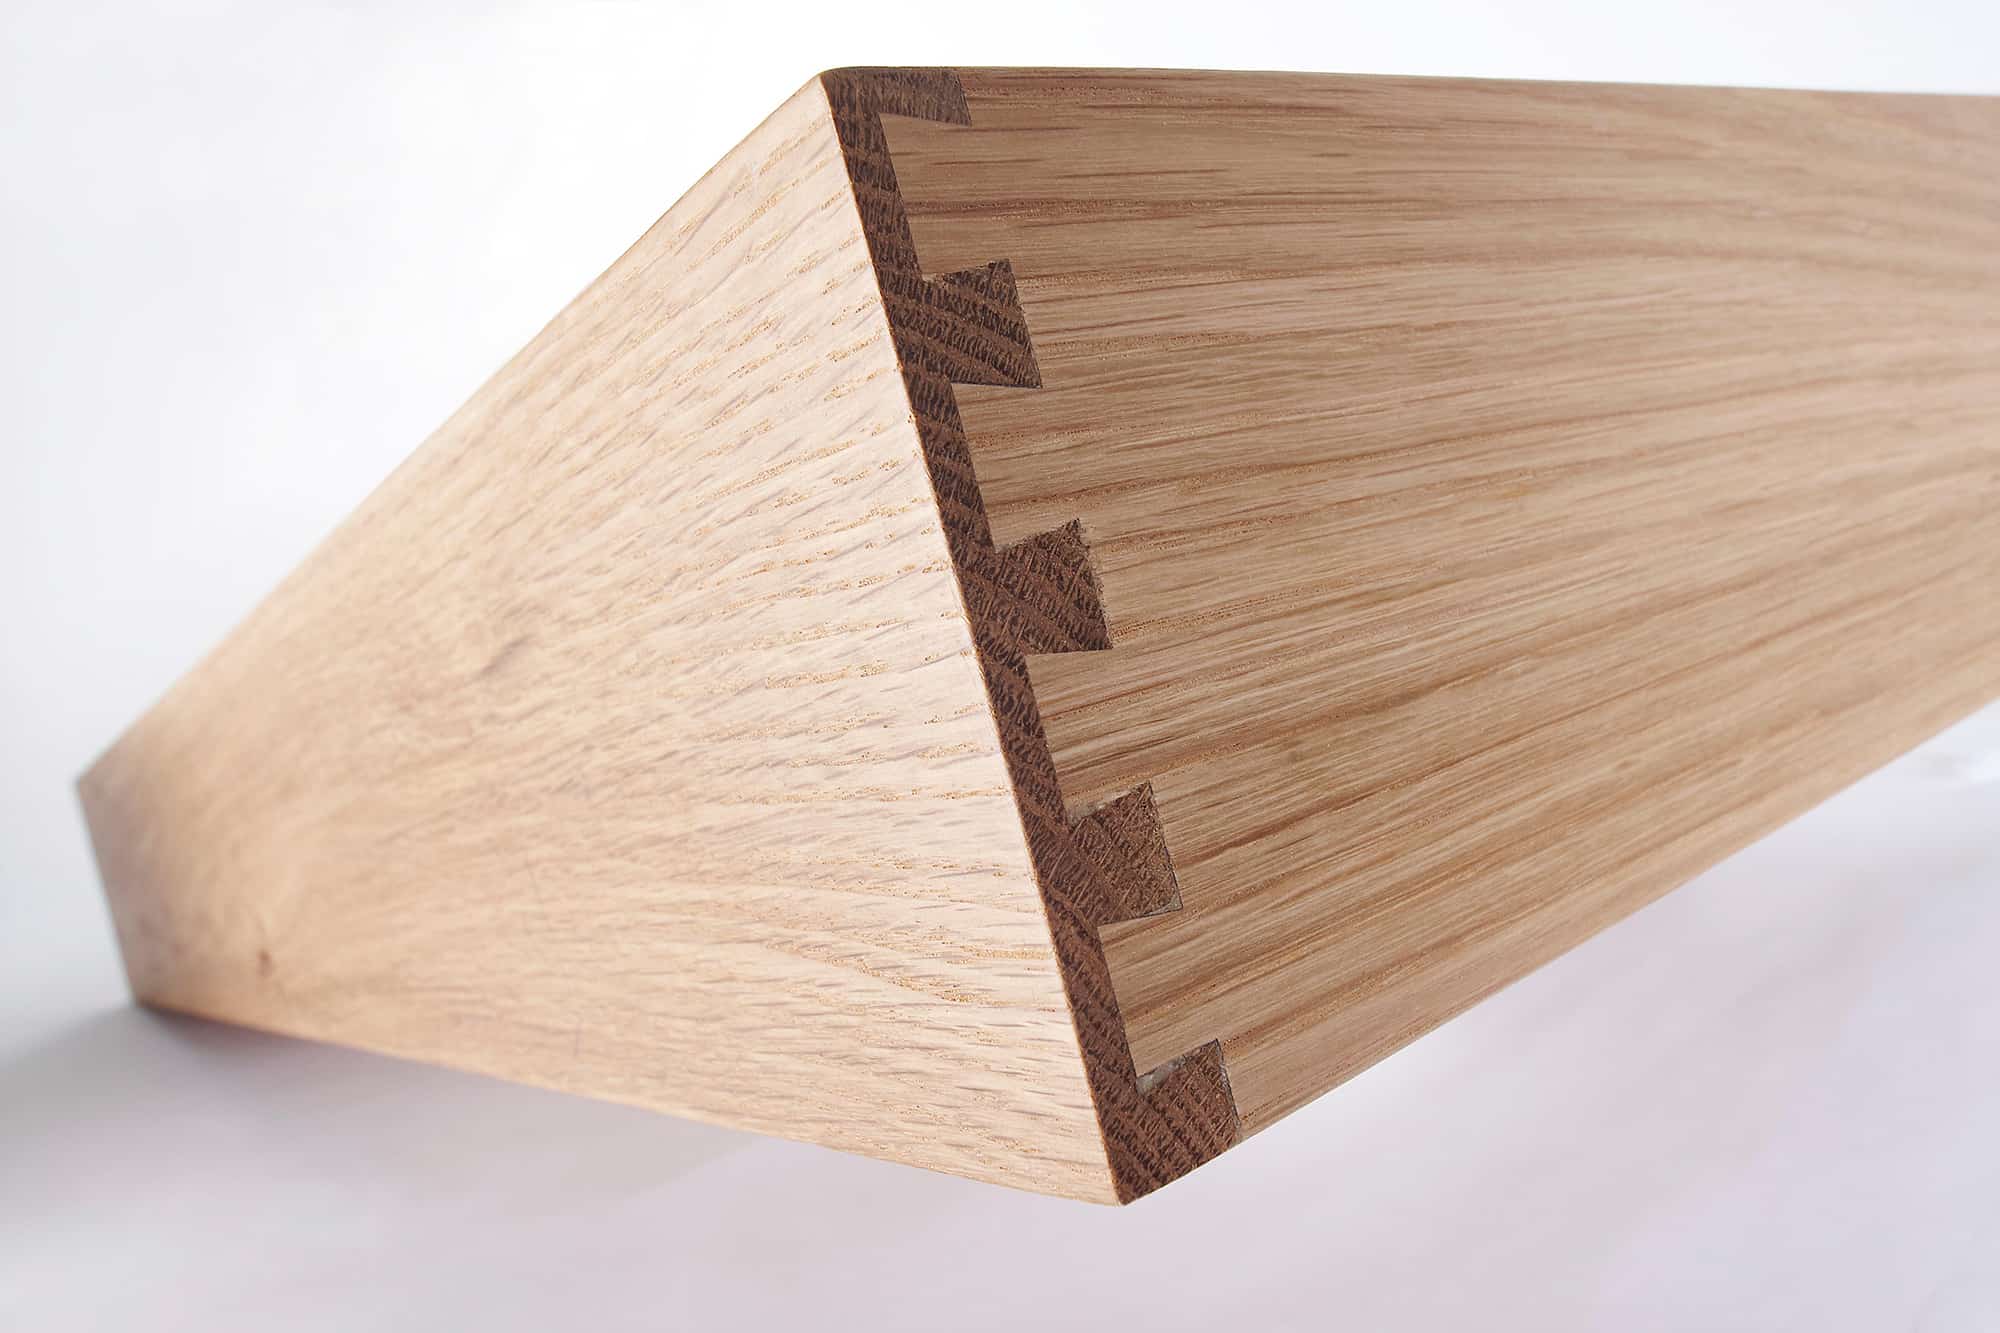 Close up of a dovetail joint on the corner